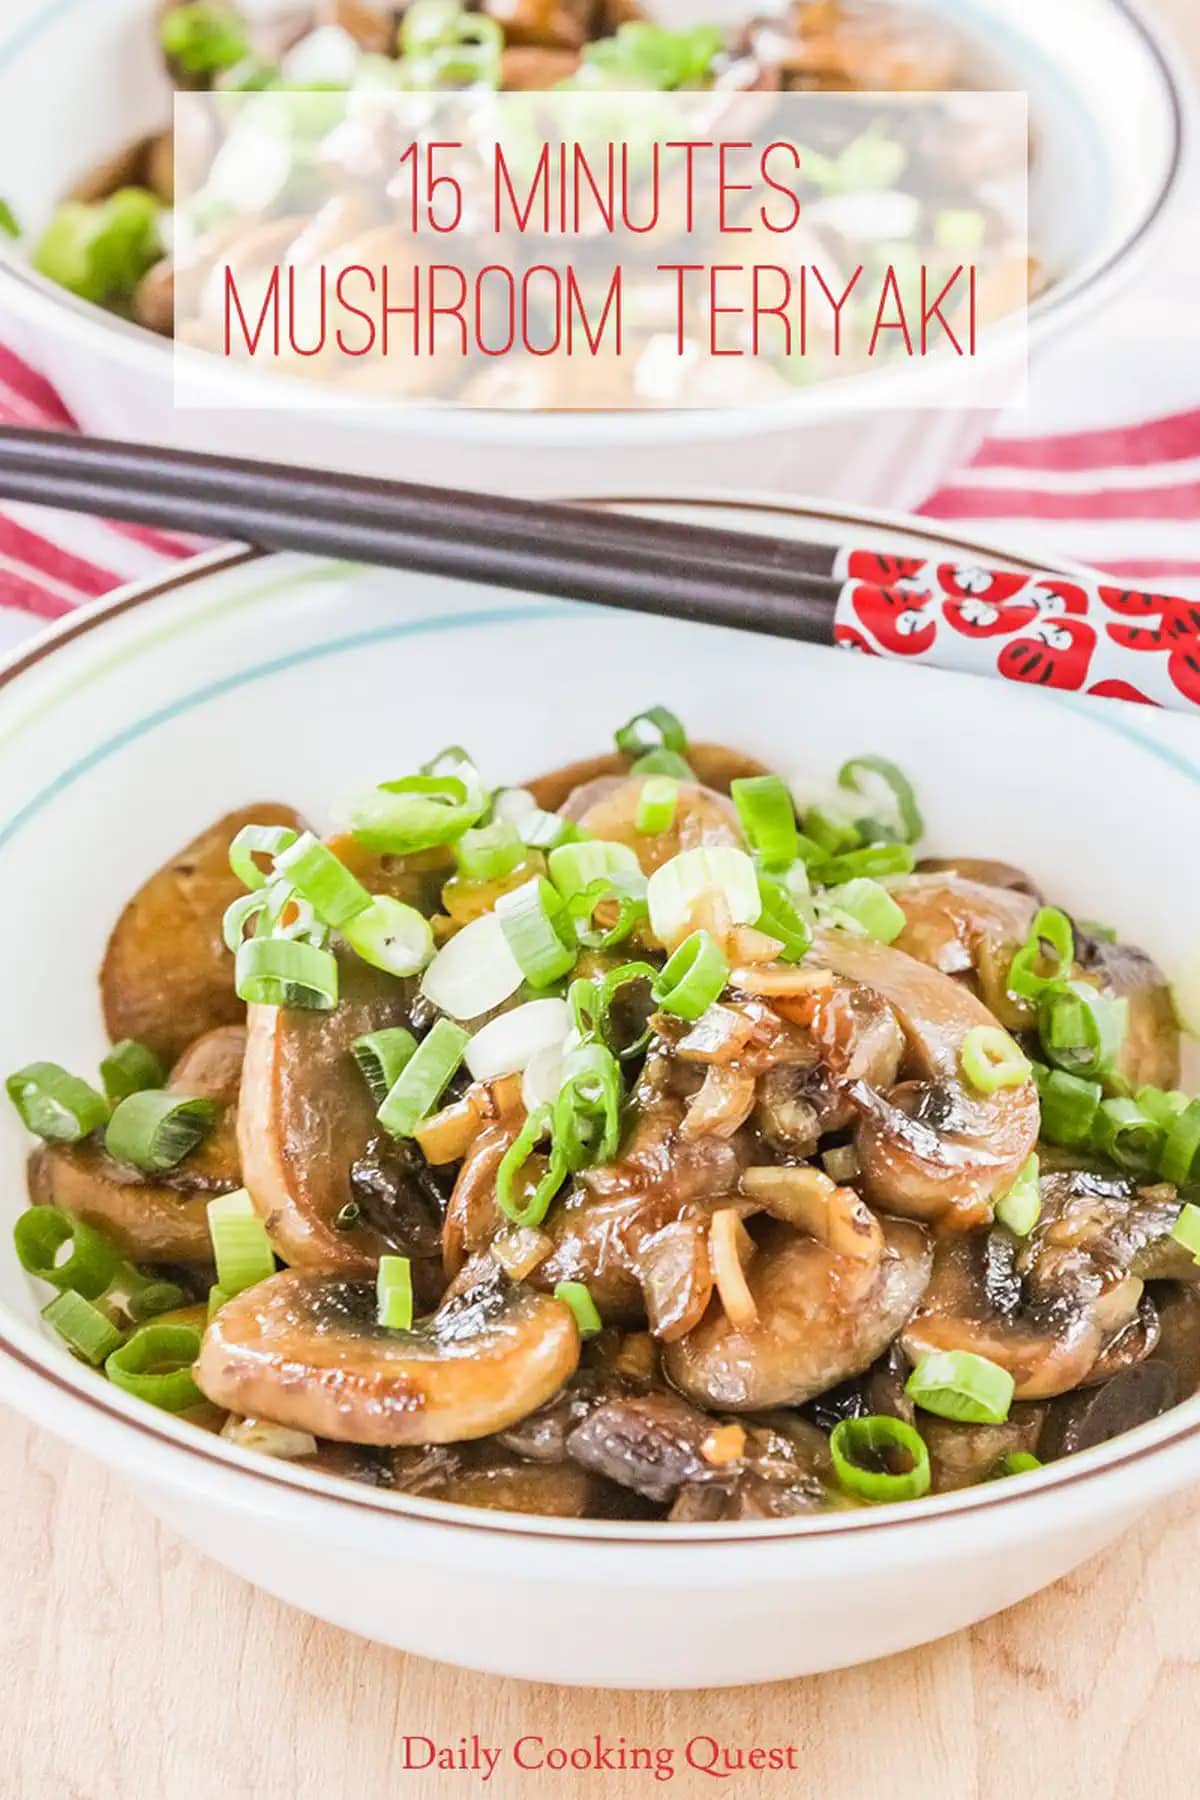 Mushroom teriyaki in a bowl garnished with chopped chives. 